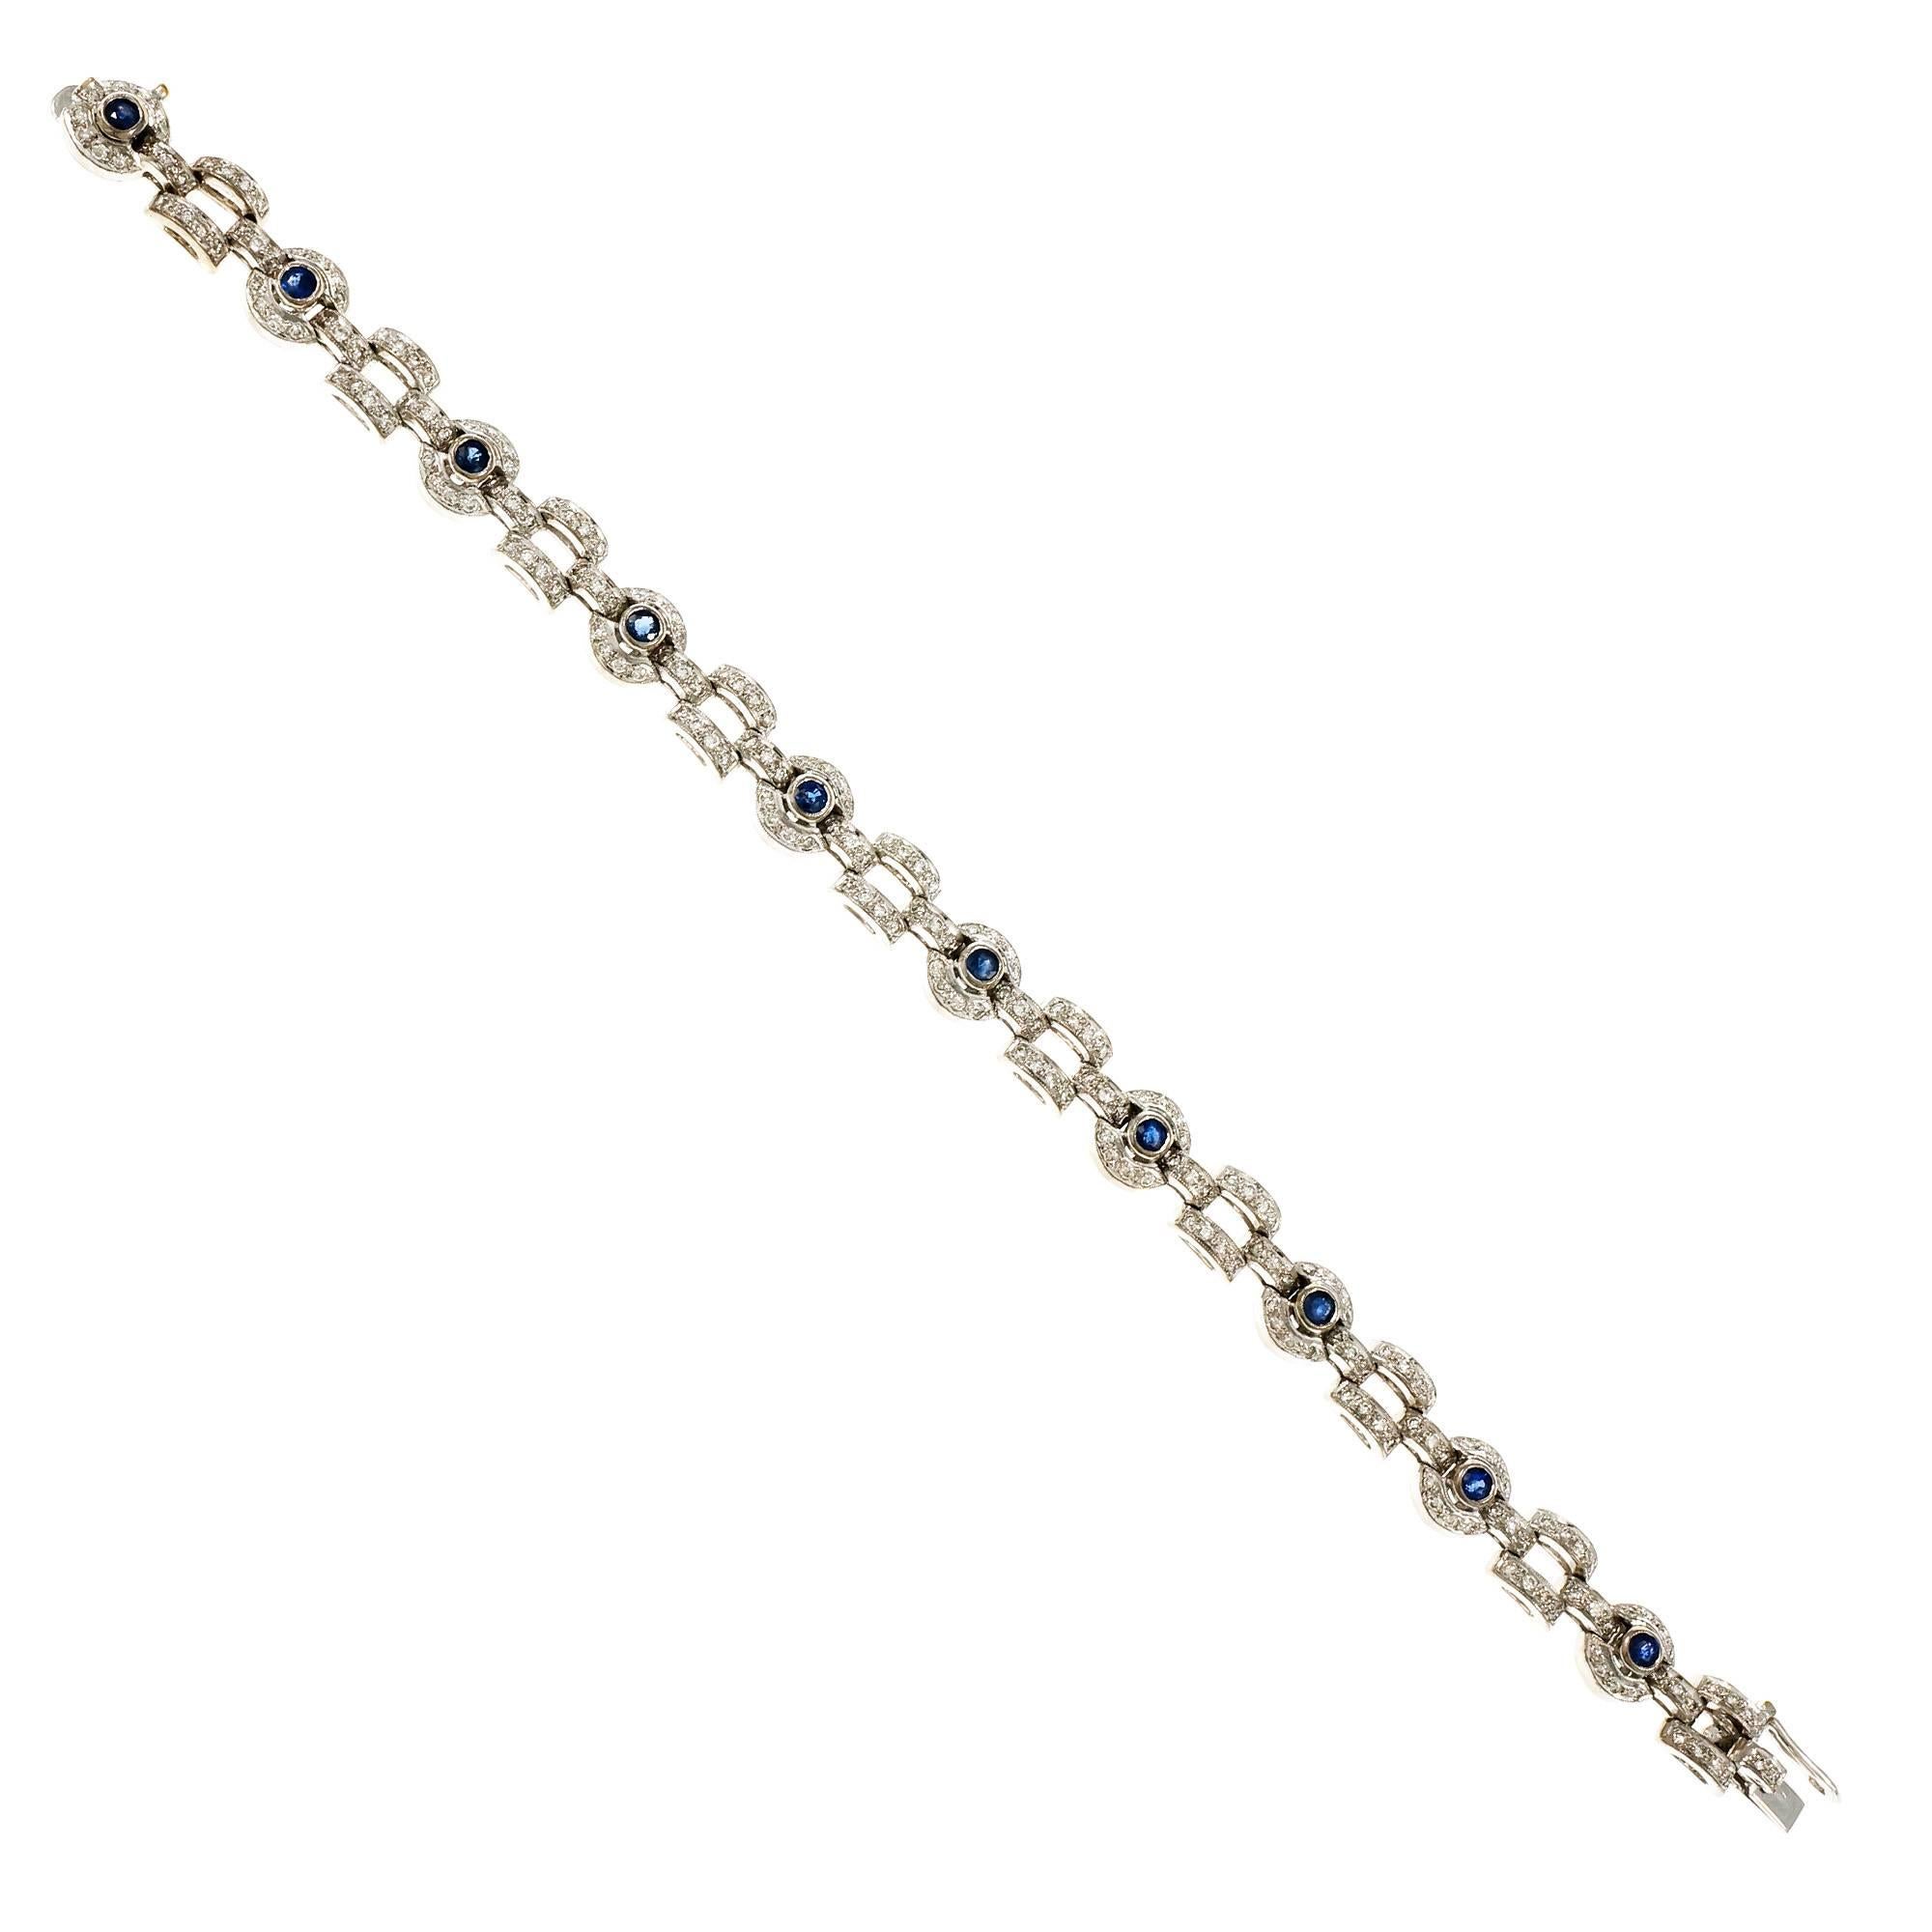 Circle and square link design Sapphire and bright full cut Diamond 18k white gold bracelet. Hidden built in catch and side lock safety.

180 round full cut Diamonds, approx. total weight .90cts, G, SI
10 round blue Sapphires, approx. total weight